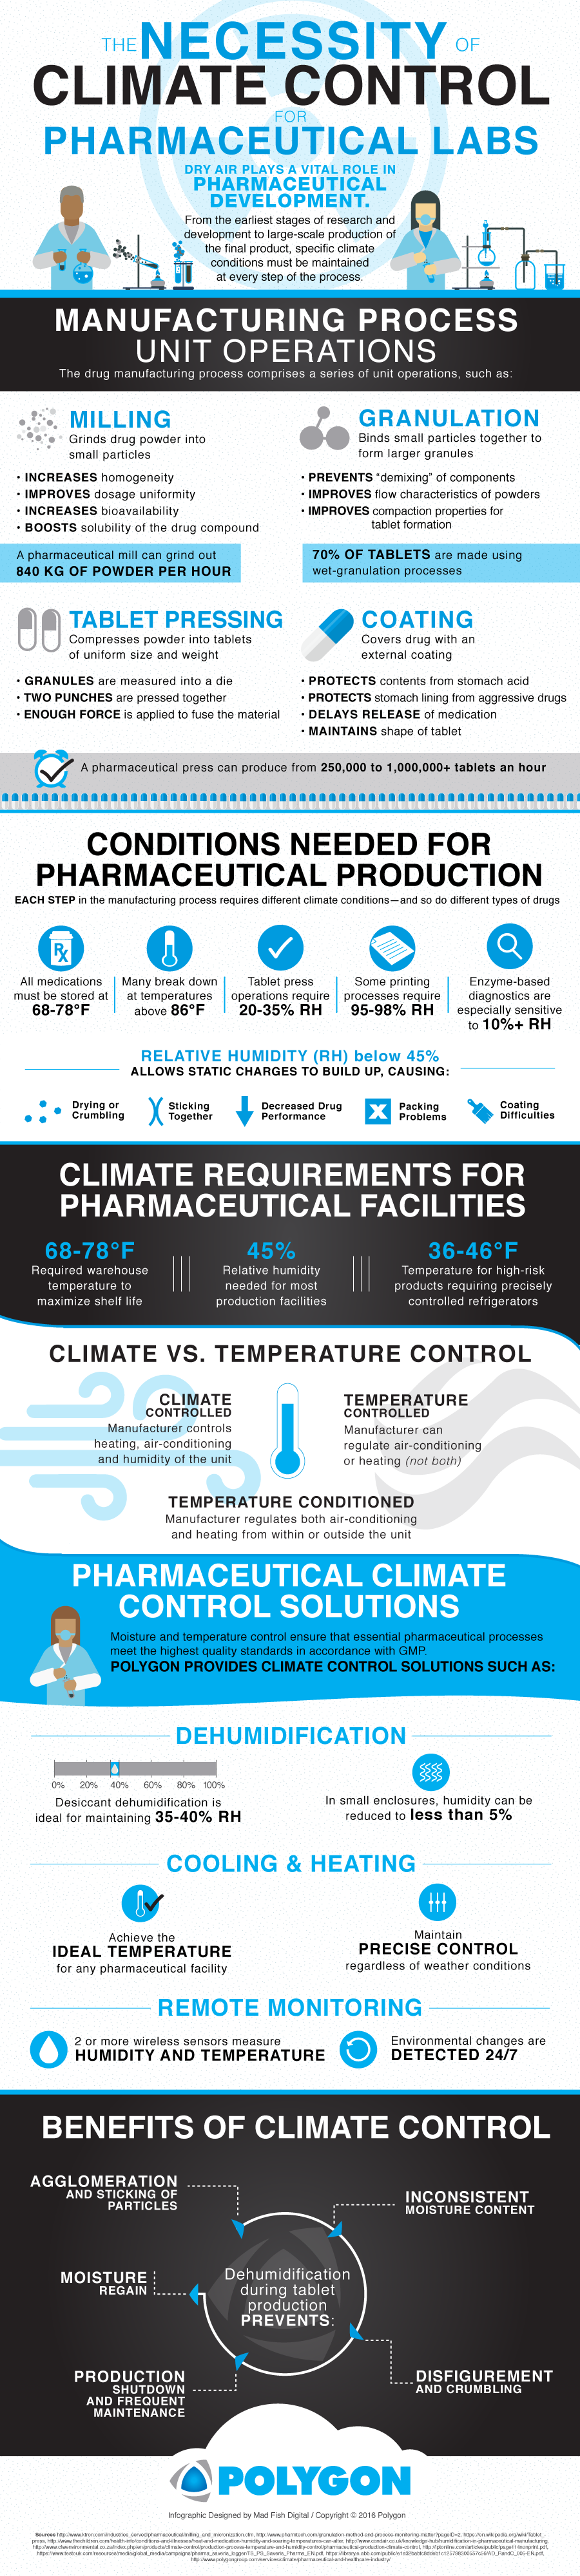 The Necessity of Climate Control in Pharmaceutical Labs